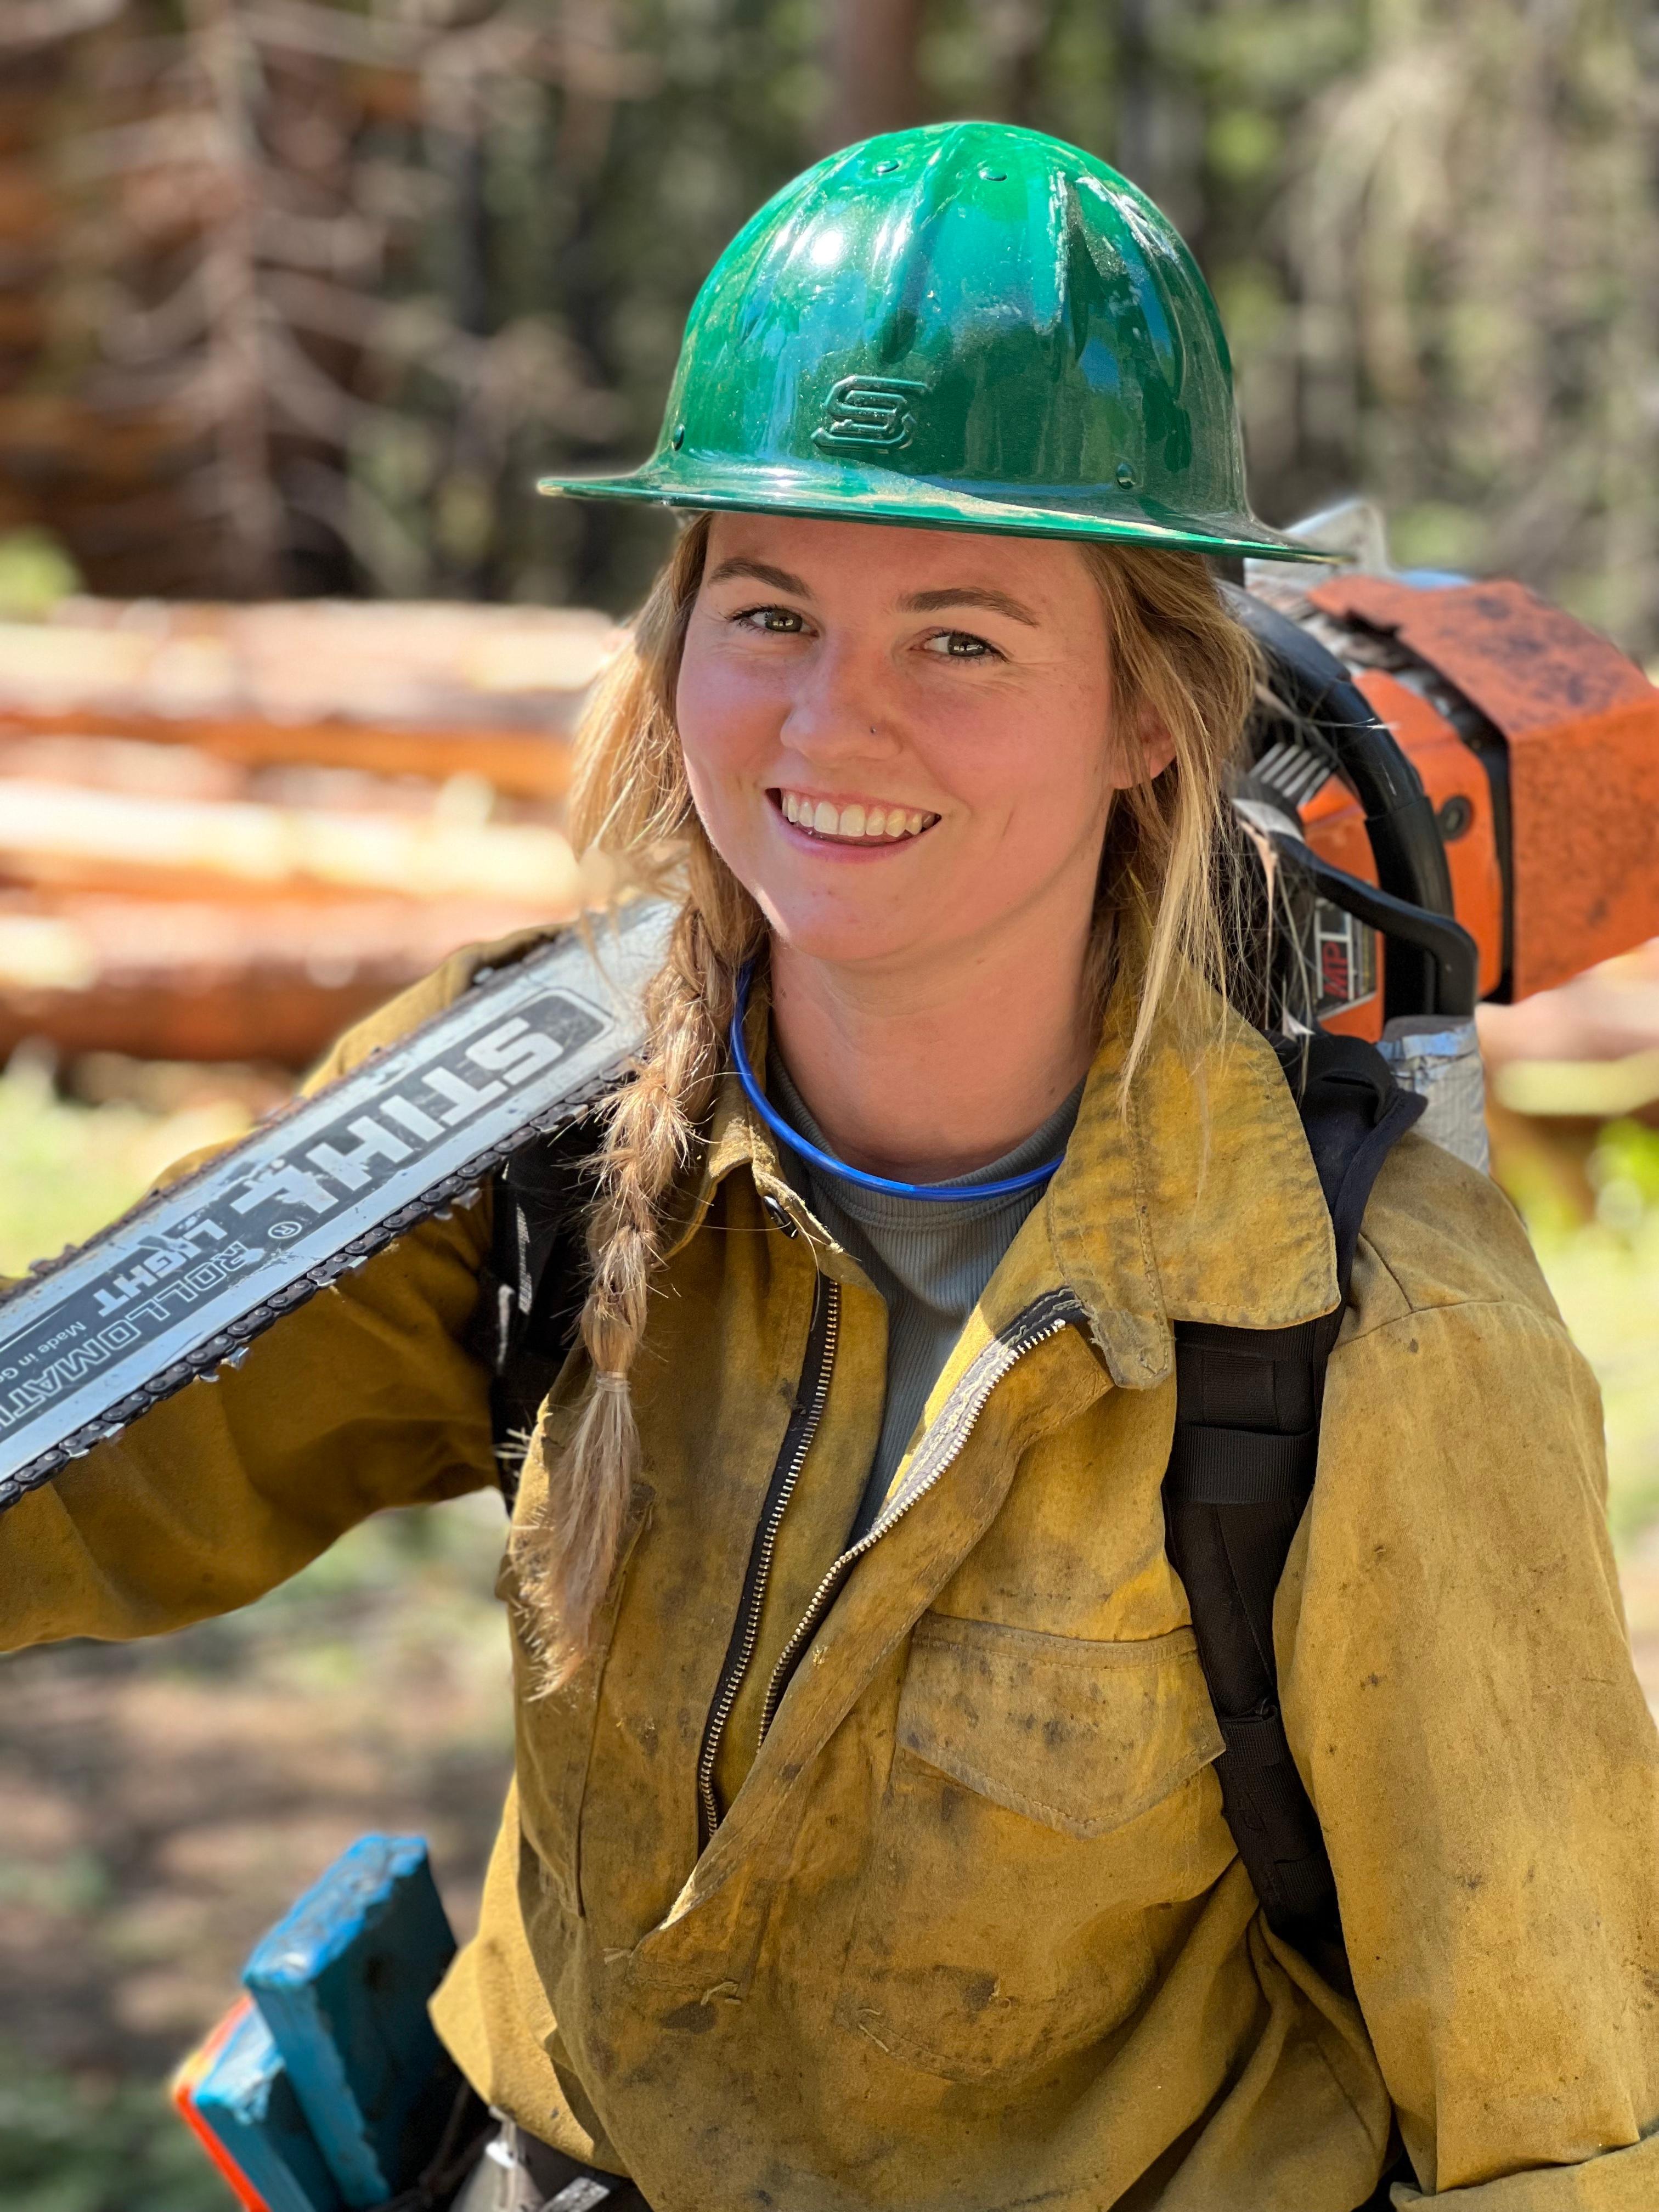 A firefighter in a green helmet is shown with a chain saw over her shoulder.